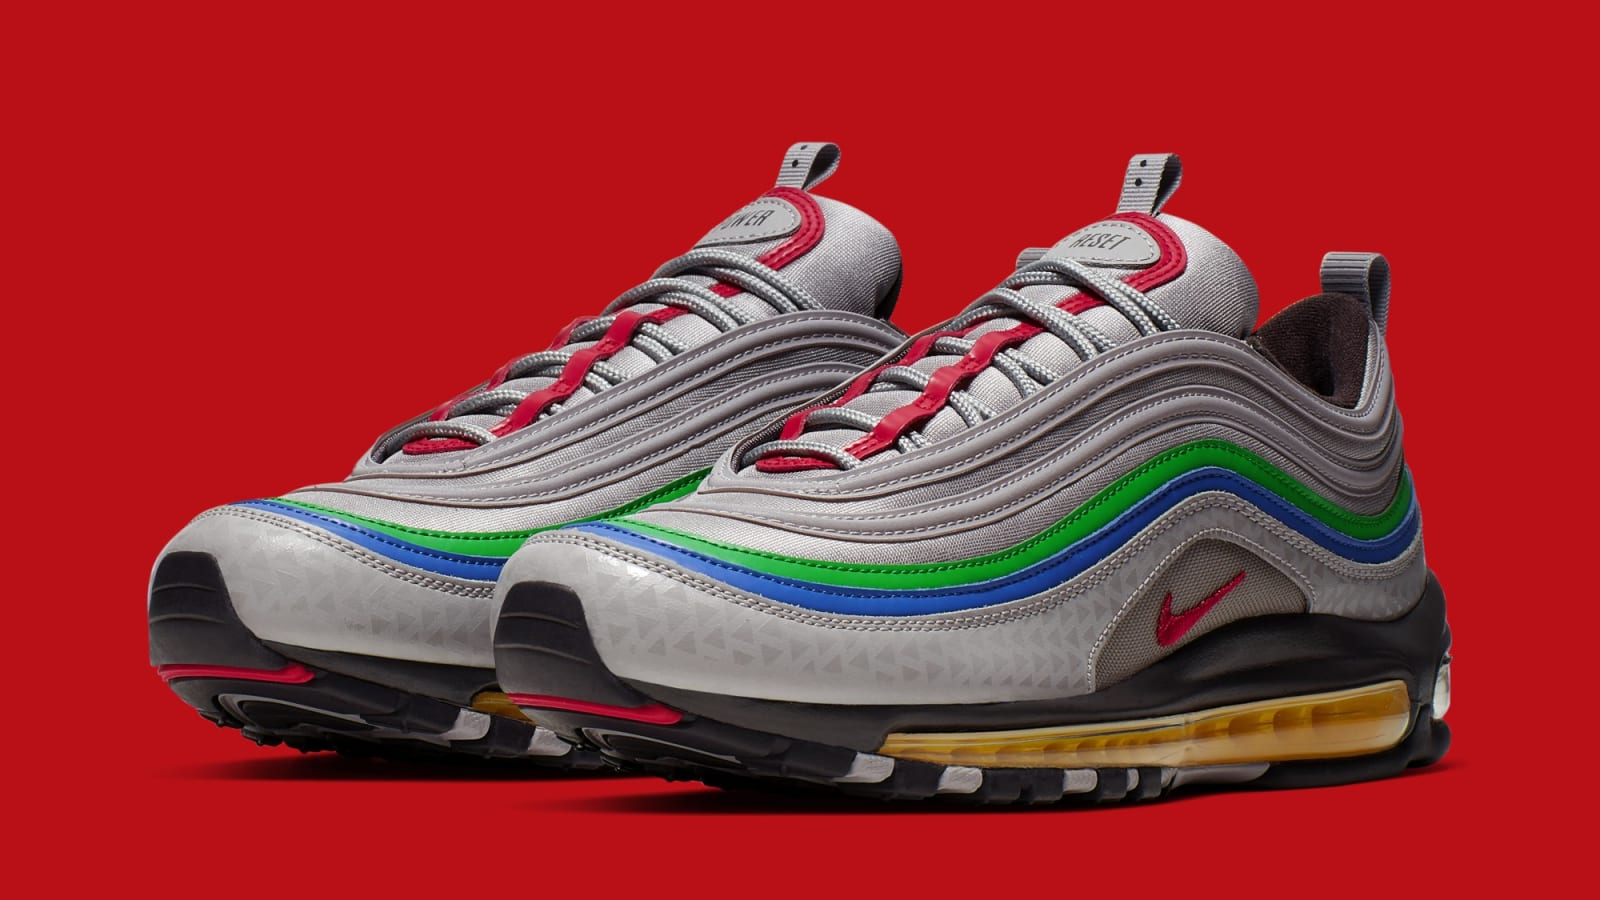 Nike Air Max 97 &quot;Nintendo 64&quot; Revealed On National Video Game Day